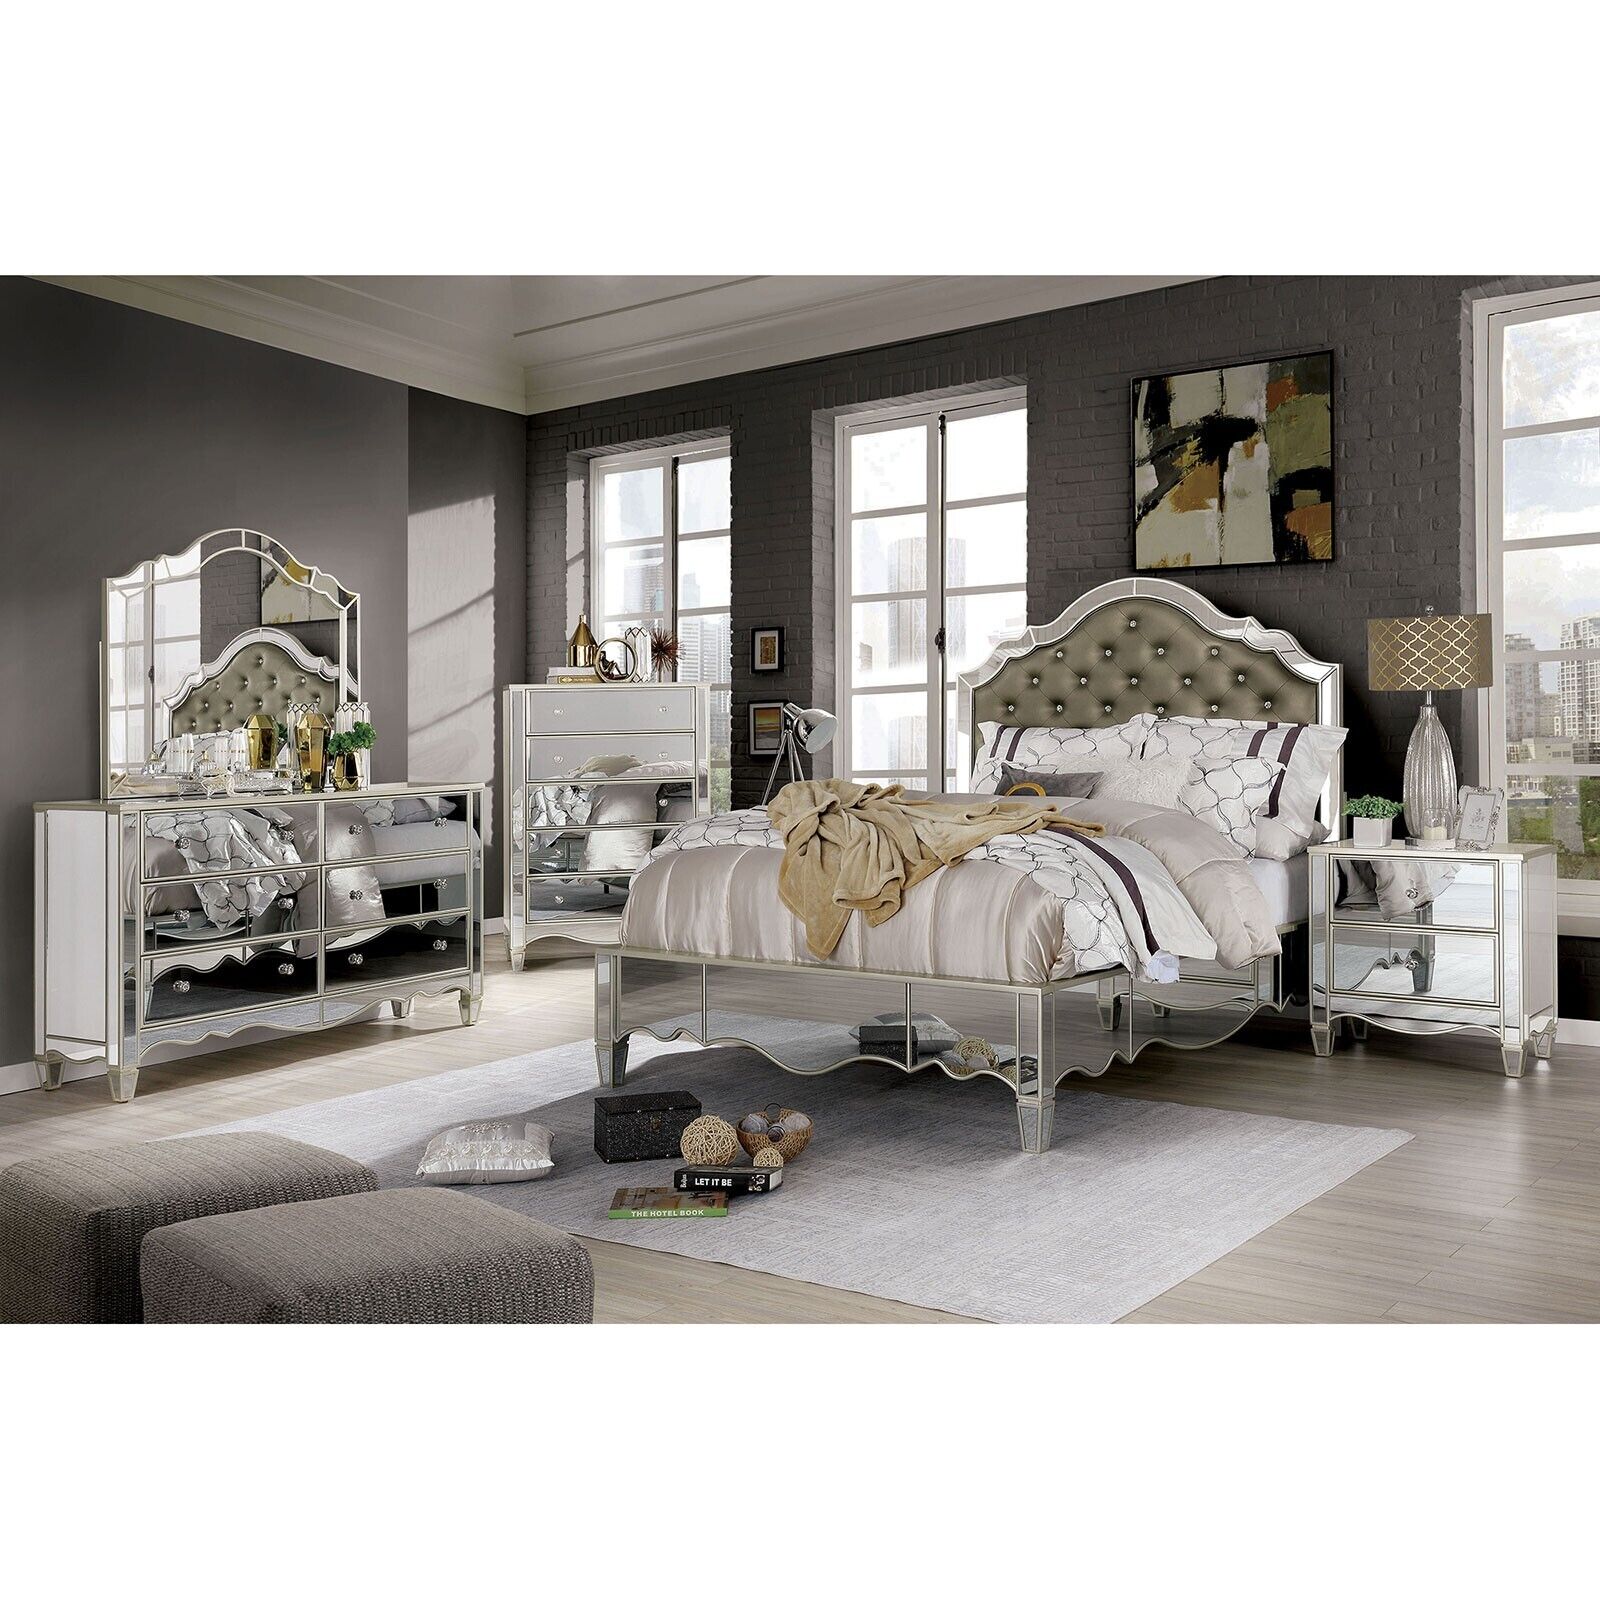 Esofastore Silver Mirror Panel 6pc Bedroom Set Gorgeous Traditional Est King Size Bed Dresser Nightstands Chest Button Tufted Leatherette